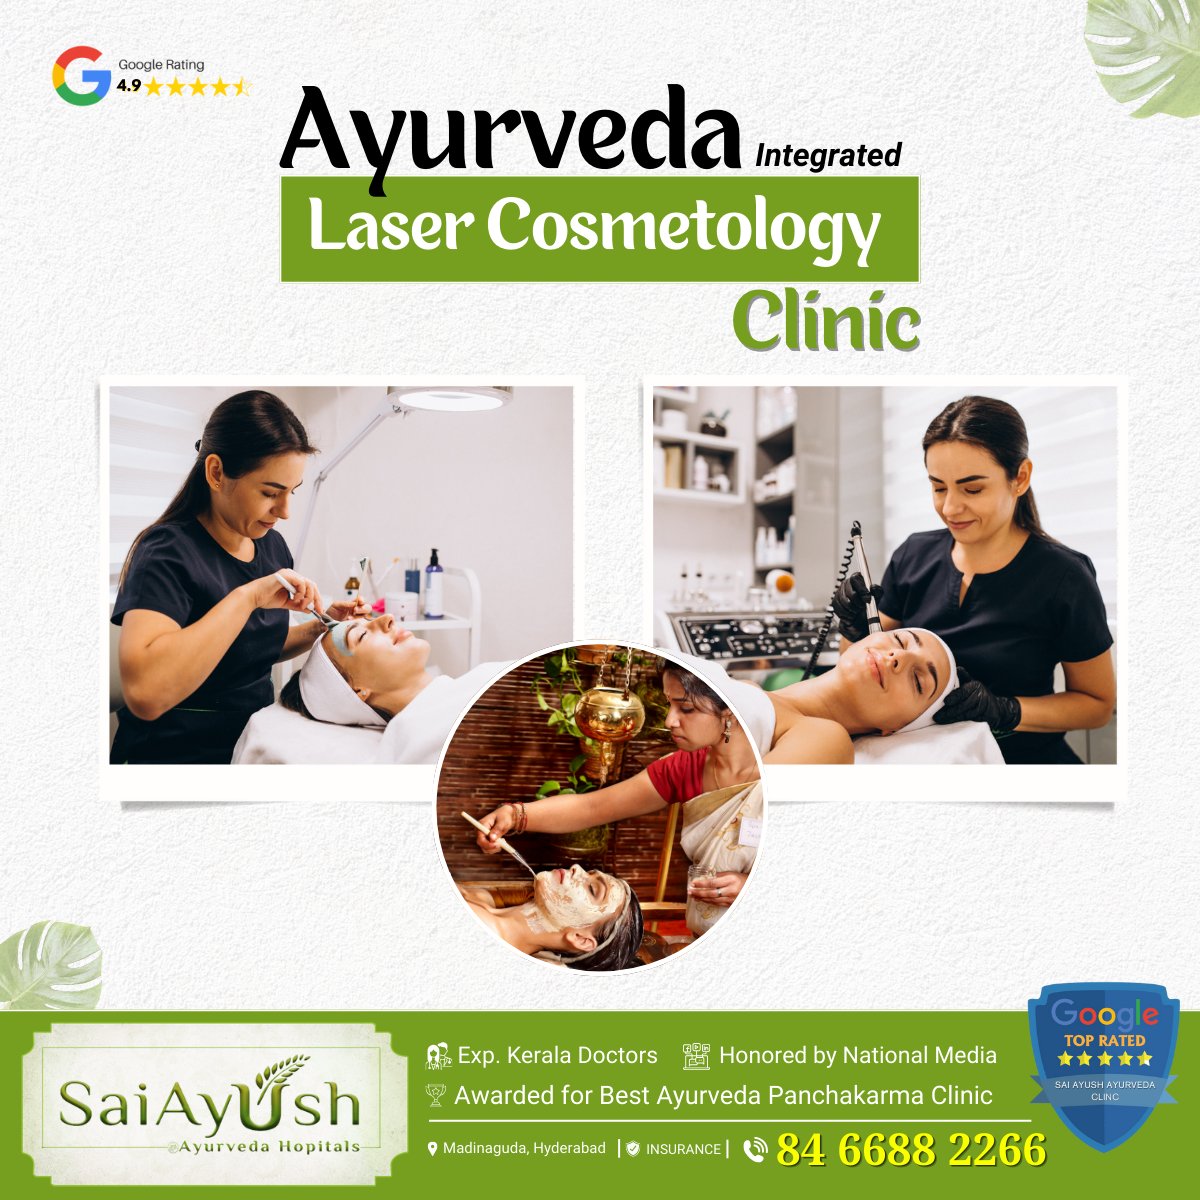 🌿 Ayurveda Integrated Laser Cosmetology Clinic Discover the perfect blend of ancient wisdom and modern technology at our Ayurveda Integrated Laser Cosmetology Clinic #skincare #laserskincare #LaserHairRemoval #Ayurveda